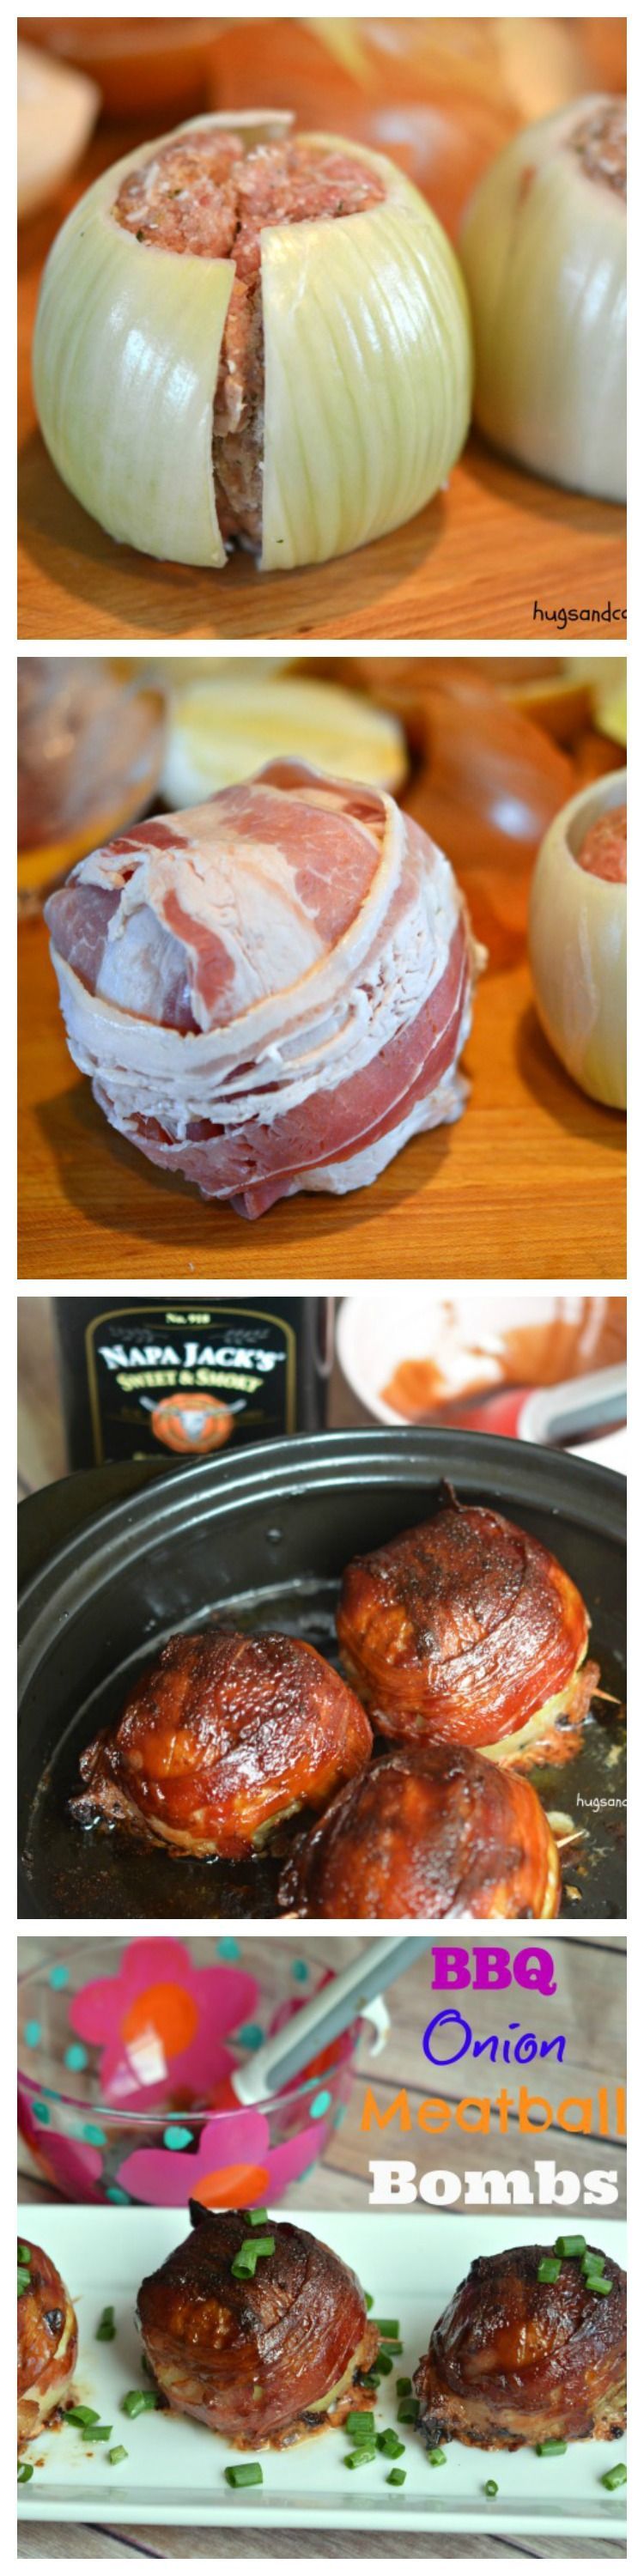 Meatloaf bombs…I will try with a smaller piece of onion or cheese inside, or both.